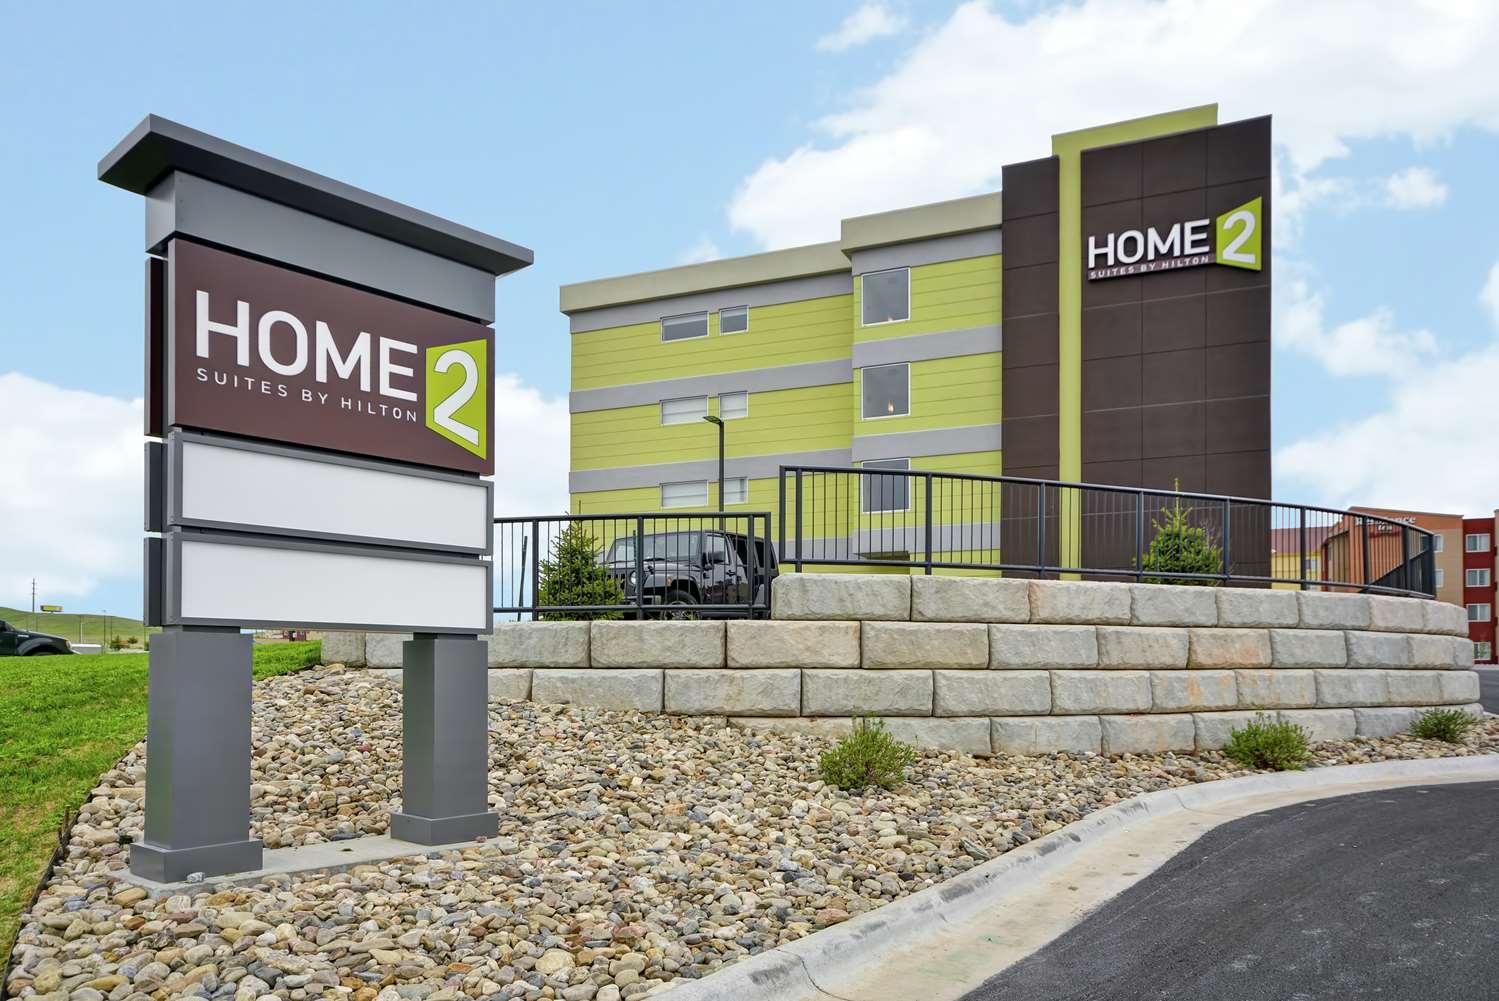 Home2 Suites by Hilton Rapid City in Box Elder, SD